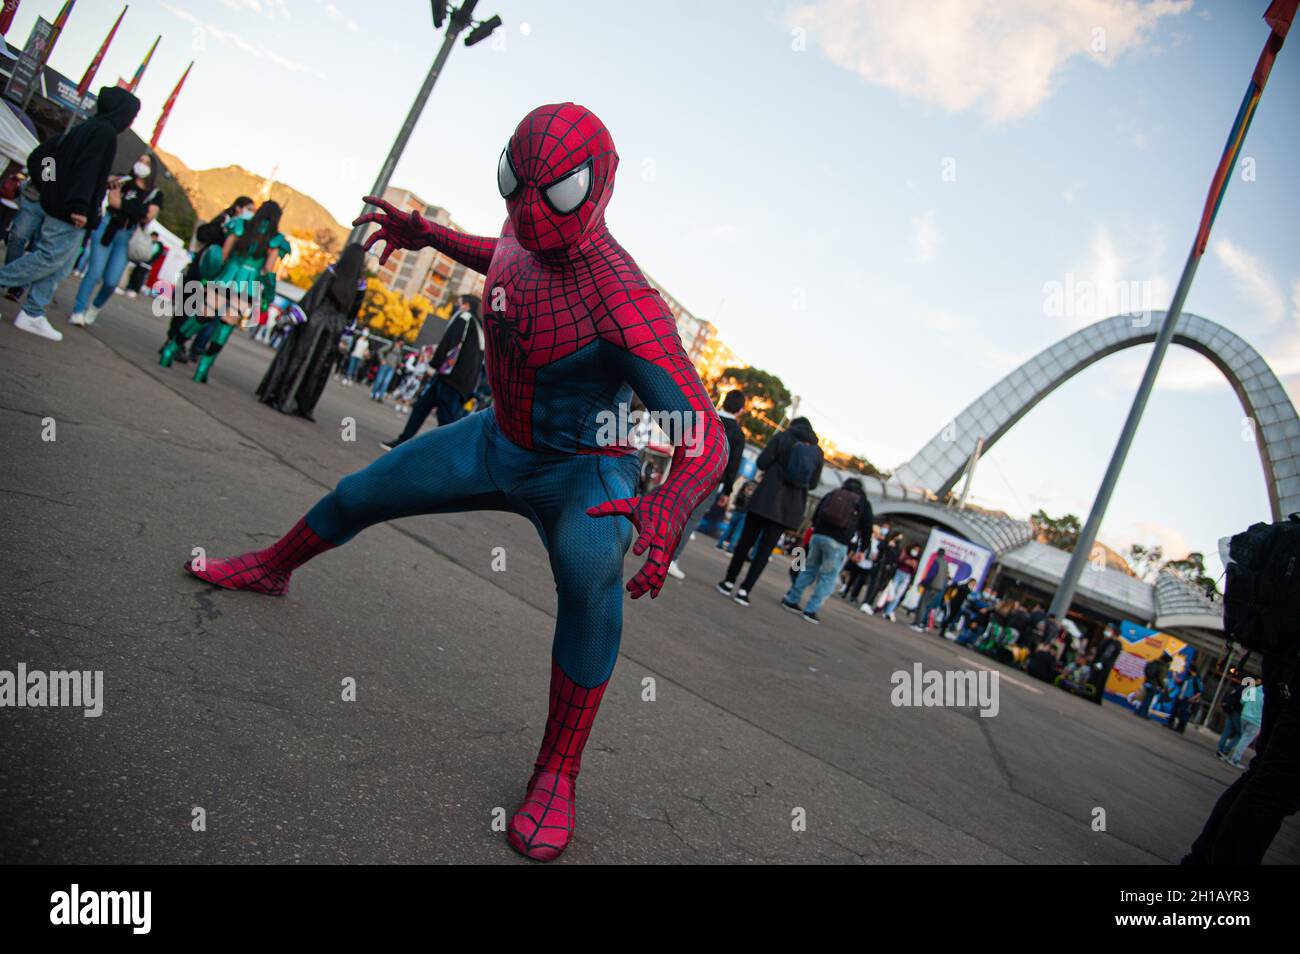 A fan of Marvel superhero Spider Man poses for a photo during the fourth day of the SOFA (Salon del Ocio y la Fantasia) 2021, a fair aimed to the geek audience in Colombia that mixes Cosplay, gaming, superhero and movie fans from across Colombia, in Bogota, Colombia on October 17, 2021. Stock Photo